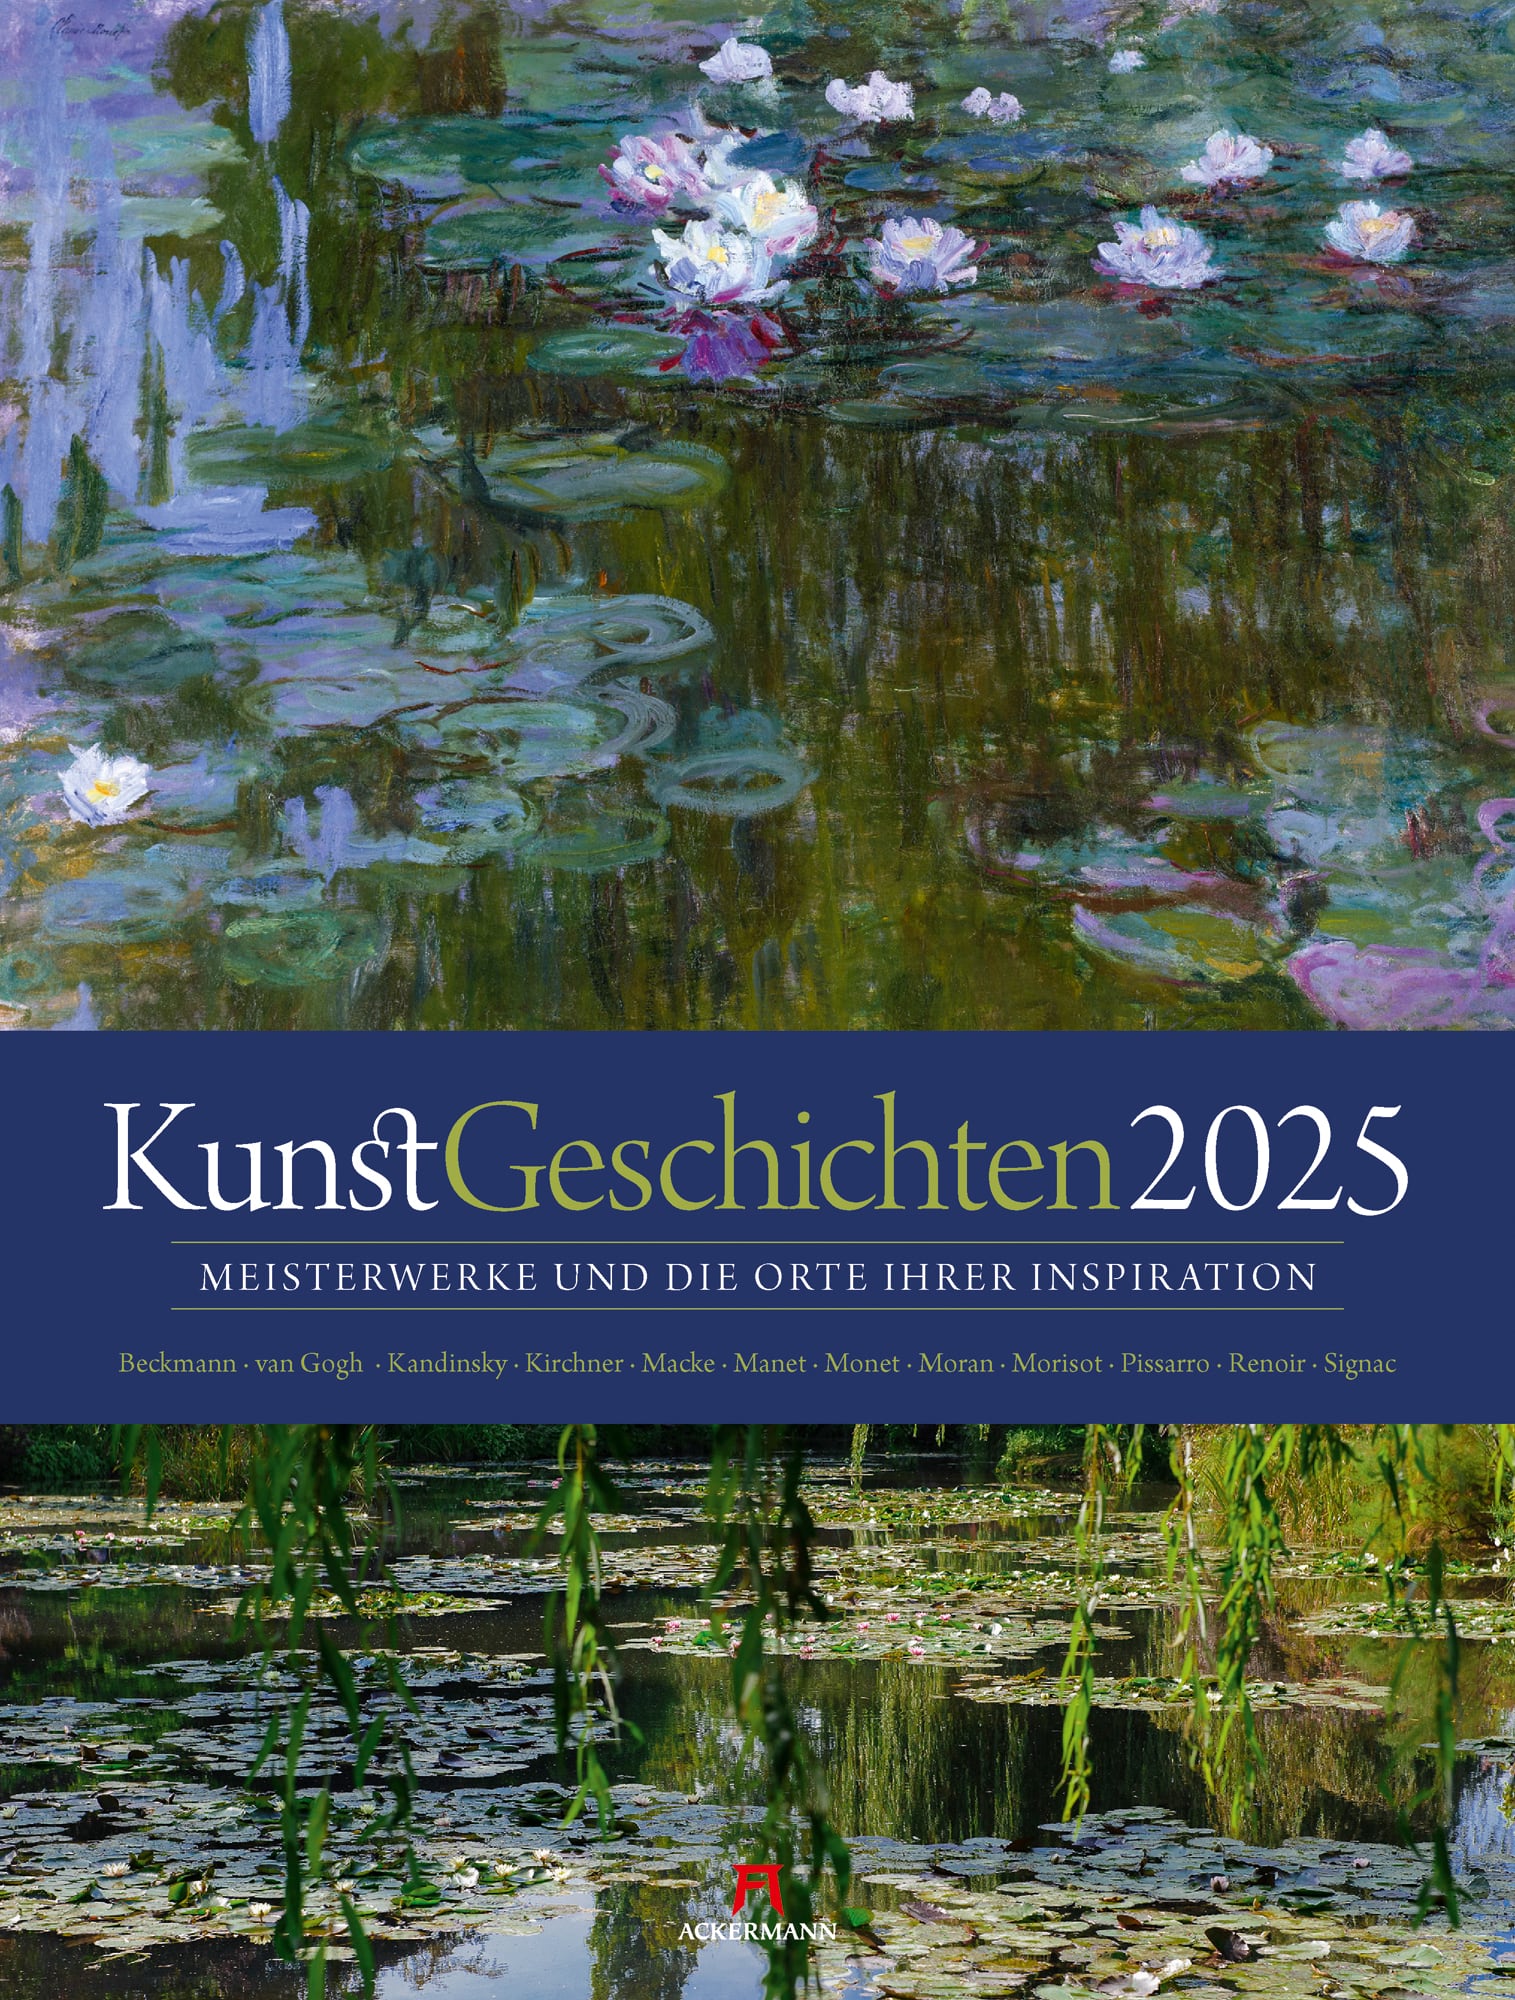 Ackermann Calendar Artists and their Sources of Inspiration 2025 - Cover Page